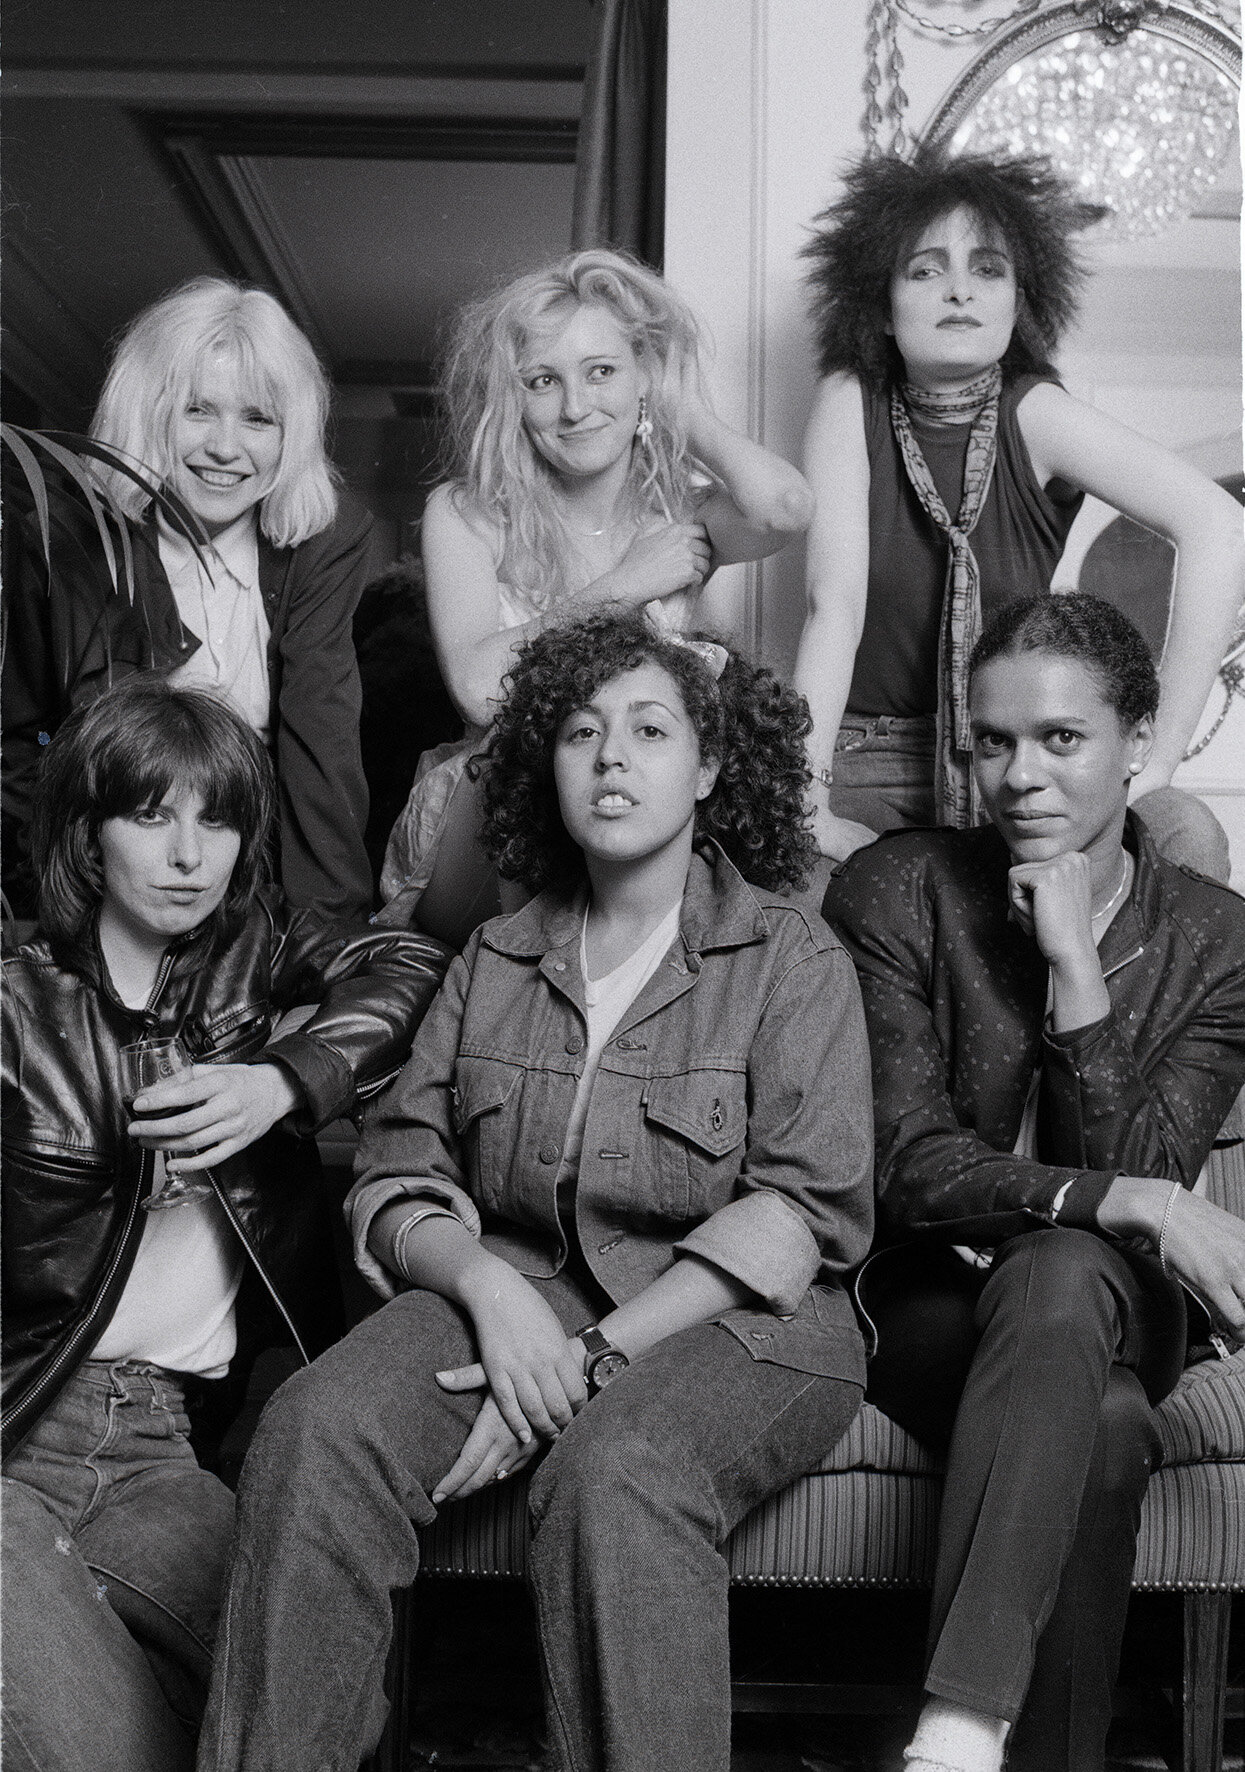 'Ladies Tea Party', London, 1980 - Debbie Harry, Viv Albertine of The Slits, Siouxsie Sioux, Chrissie Hynde, Poly Styrene of X-Ray Spex and Pauline Black of The Selector